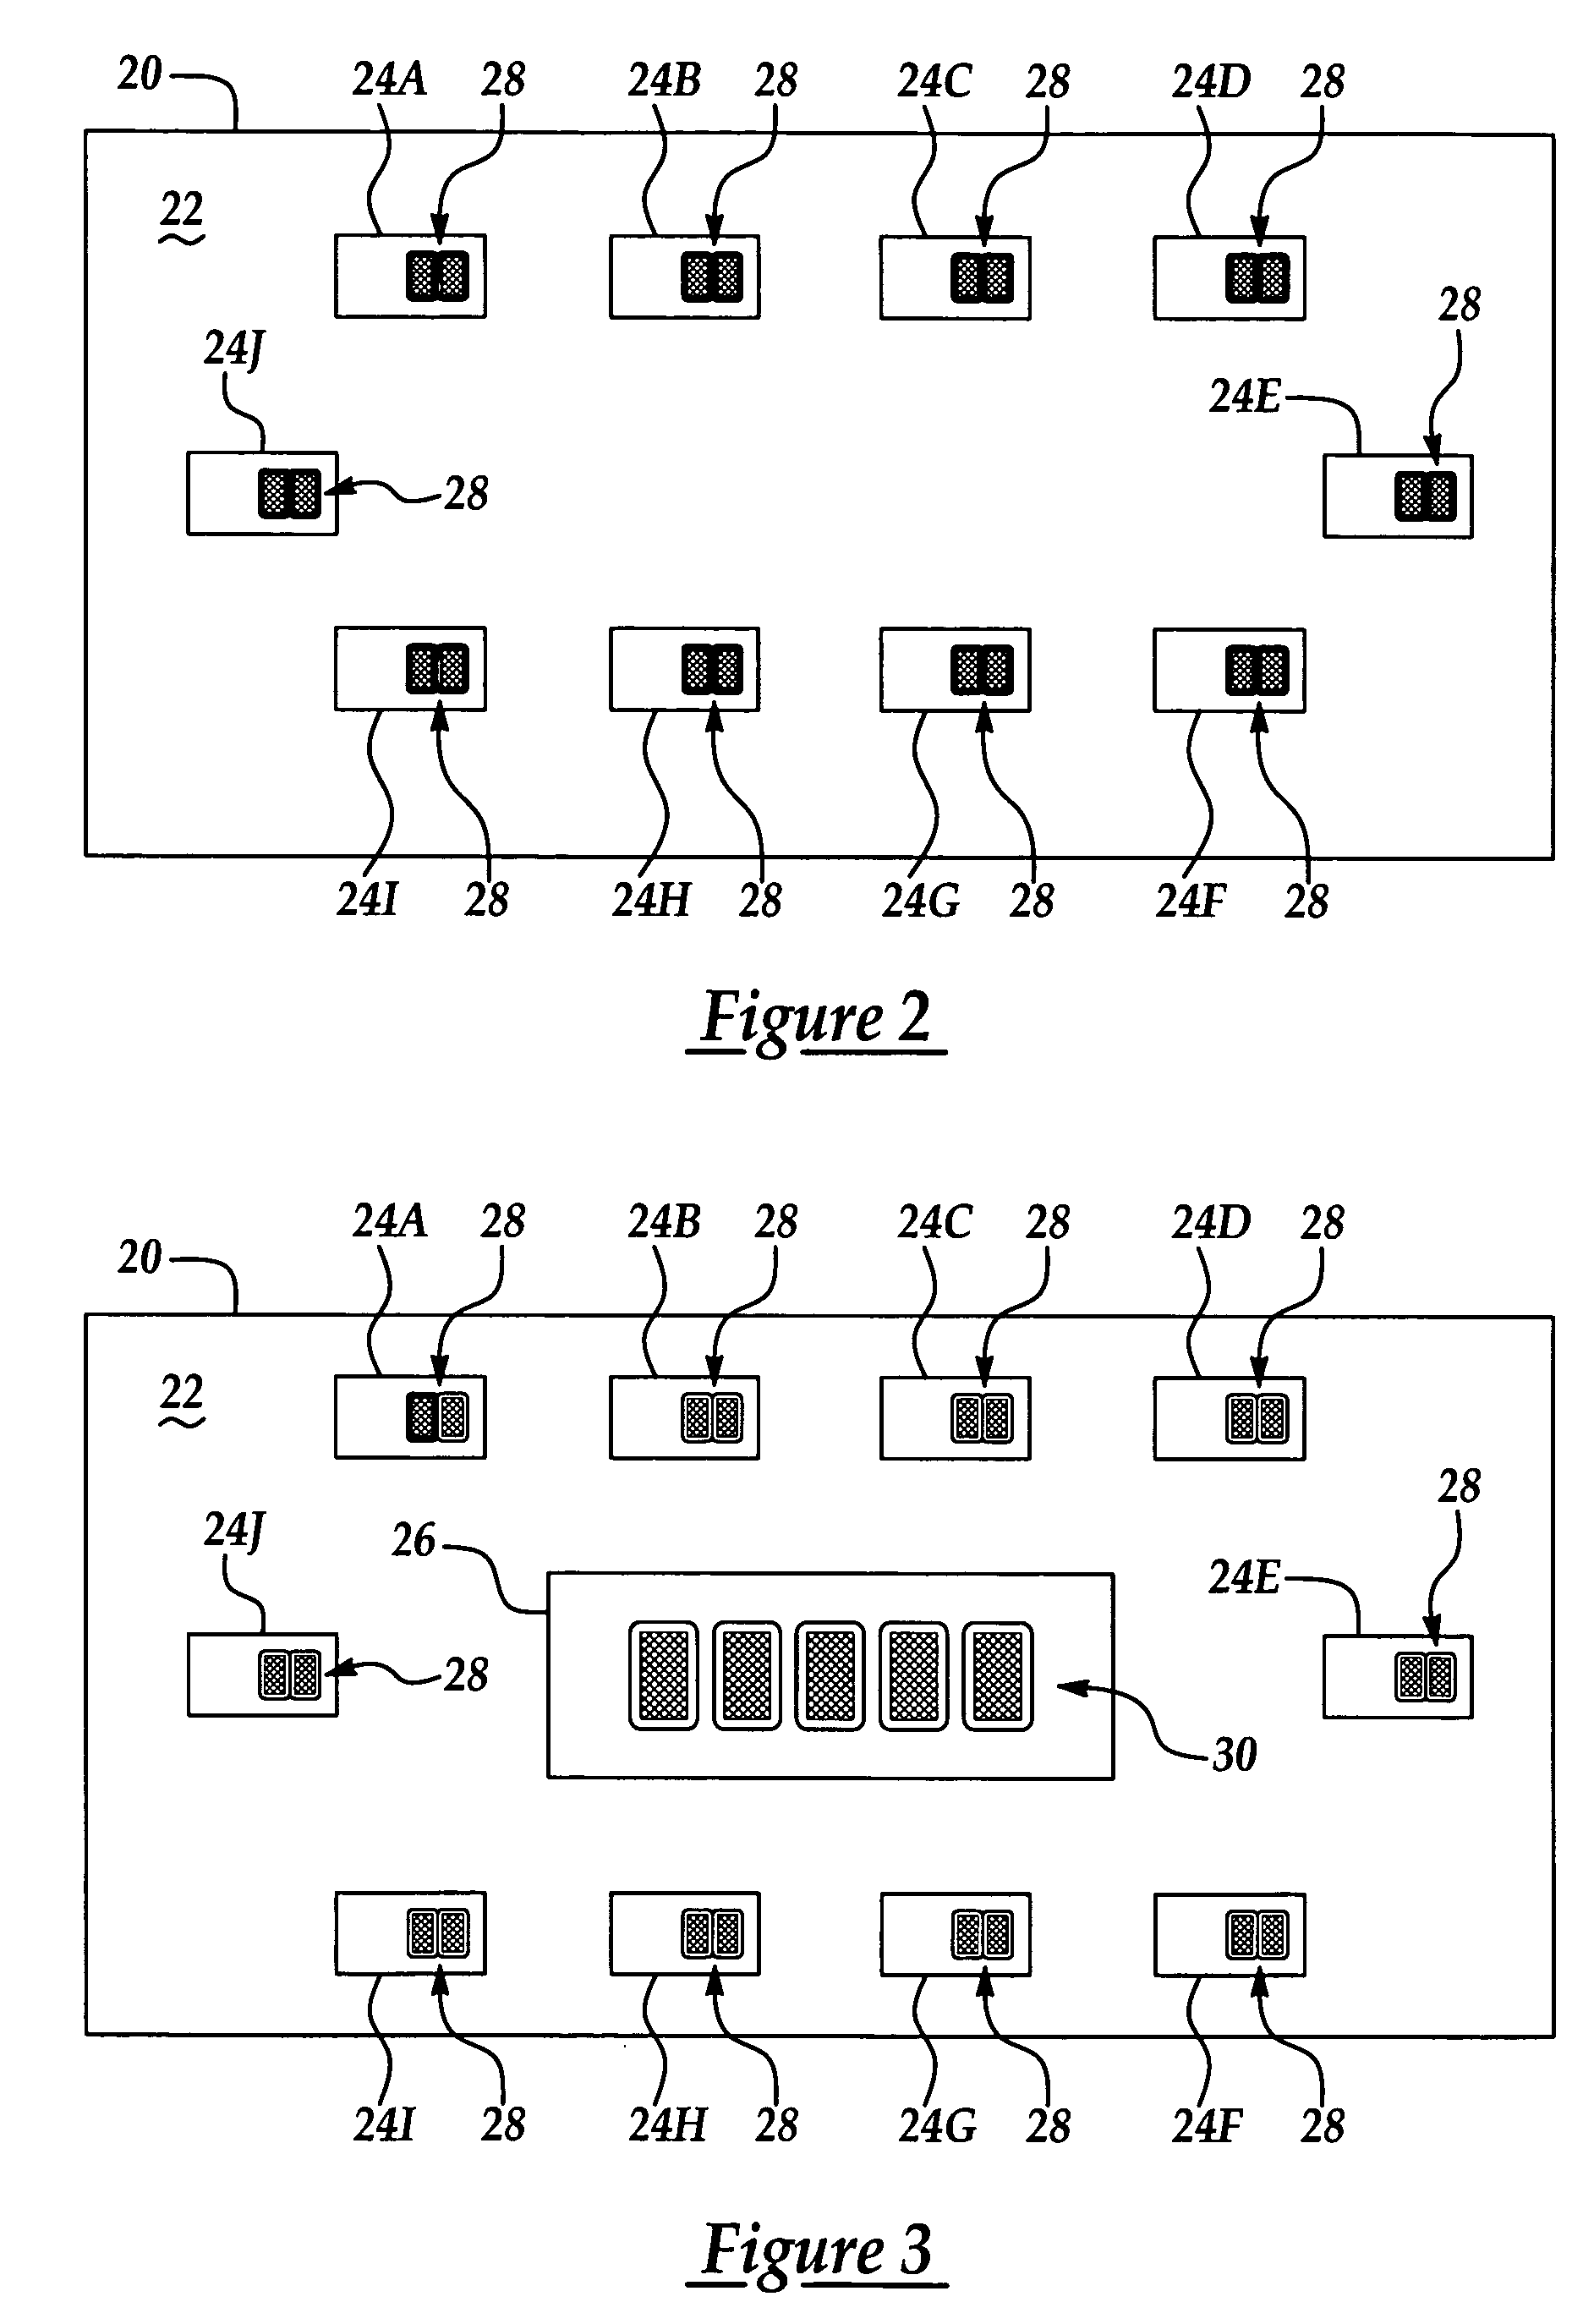 Electronic card table having a display device for implementing electronic player interaction areas